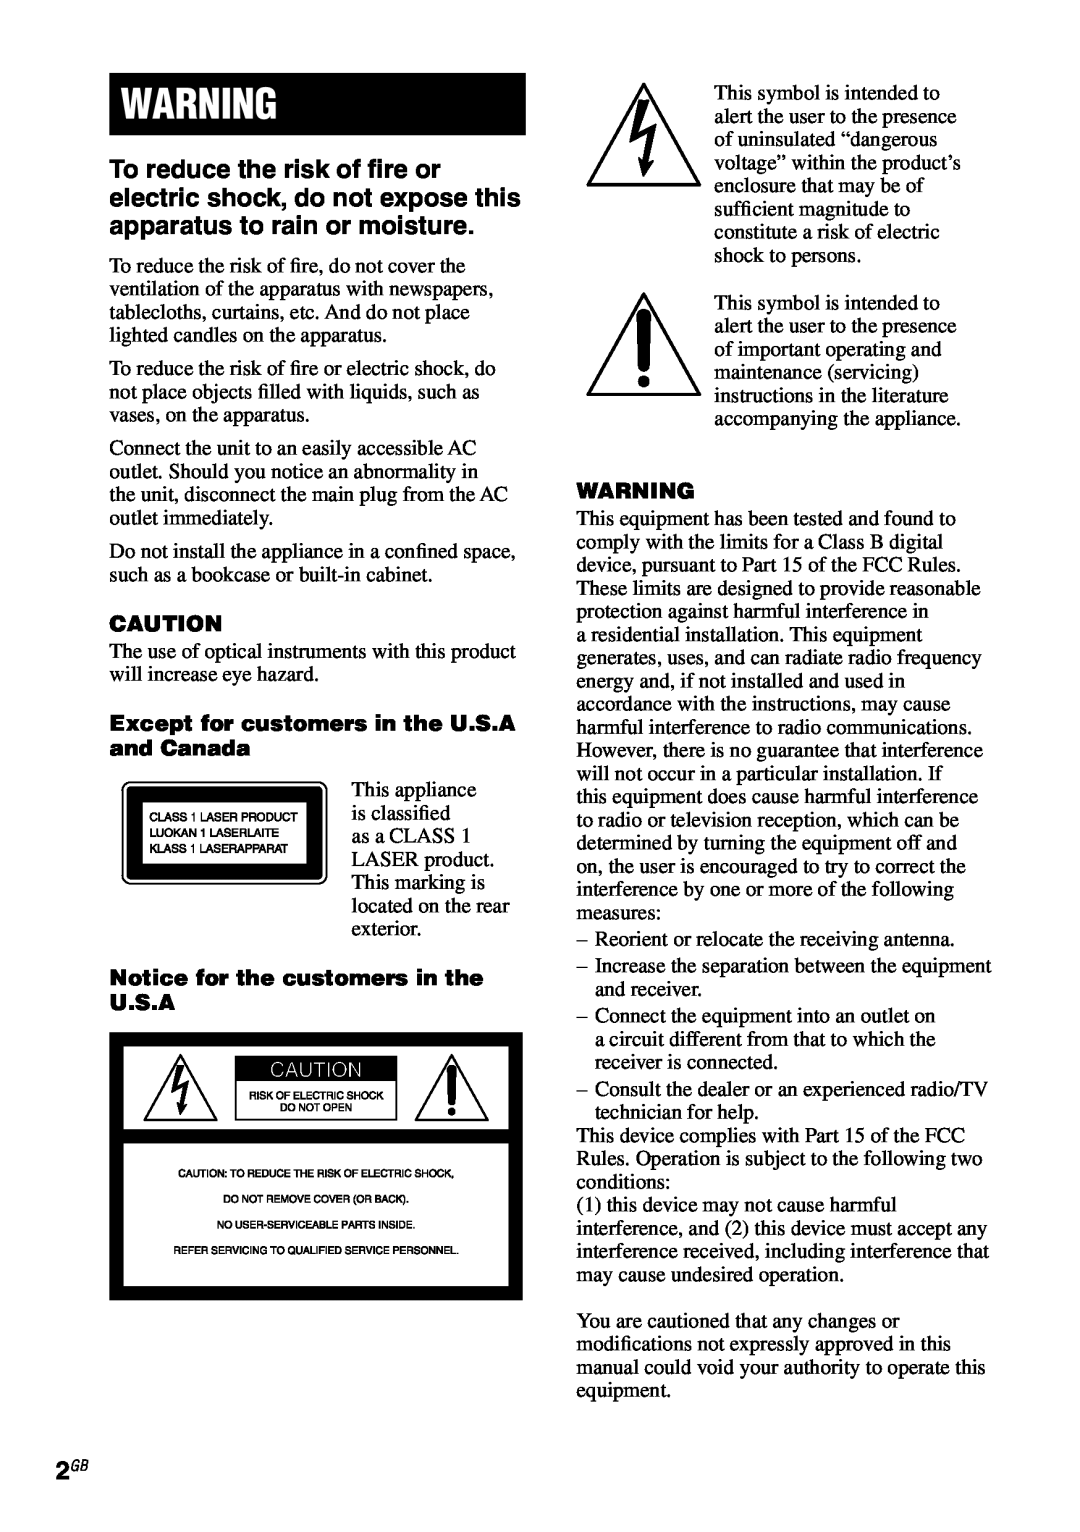 Sony MHC-GX470 manual Except for customers in the U.S.A and Canada, Notice for the customers in the U.S.A 